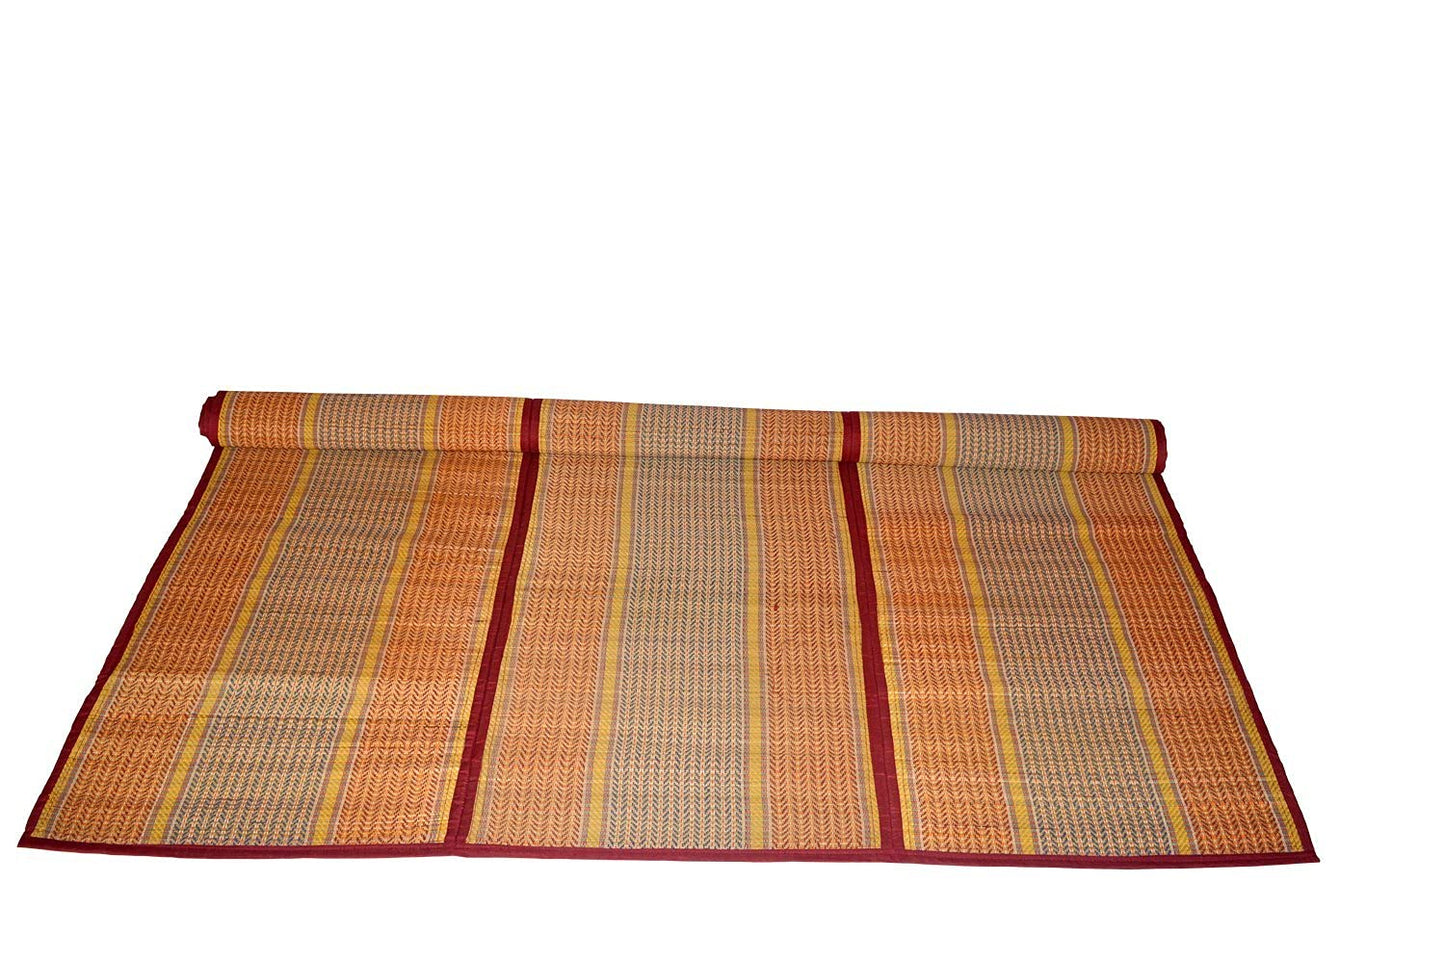 Chatai Floor Mat Foldable handwoven Multicolpur made of Madurkathi Grass for Indoor and Outdoor Usages - T3-35